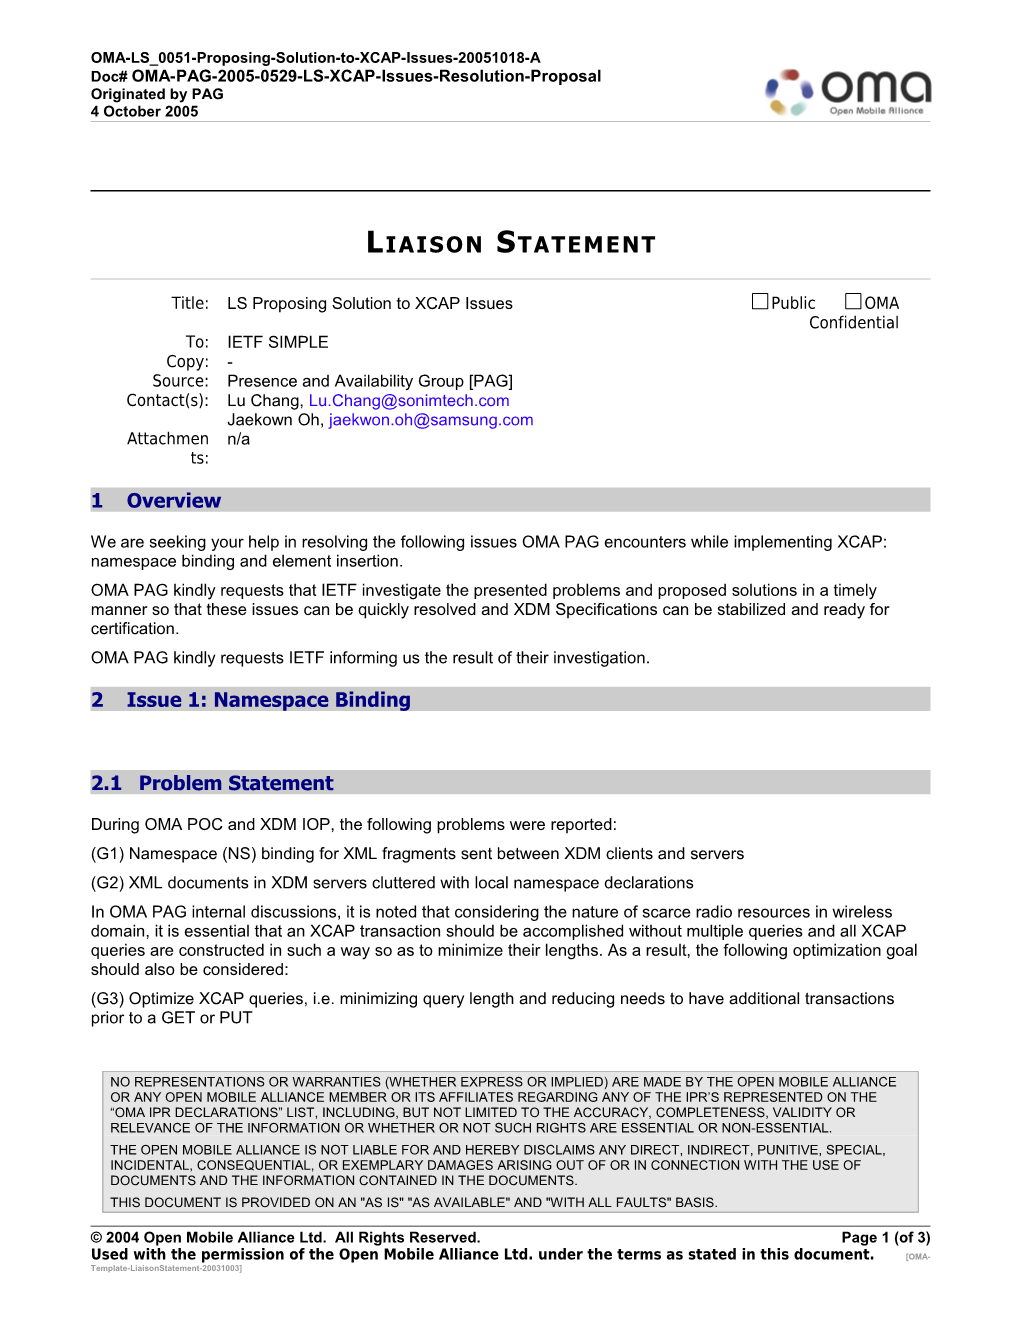 OMA-LS 0051-Proposing-Solution-To-XCAP-Issues-20051018-A